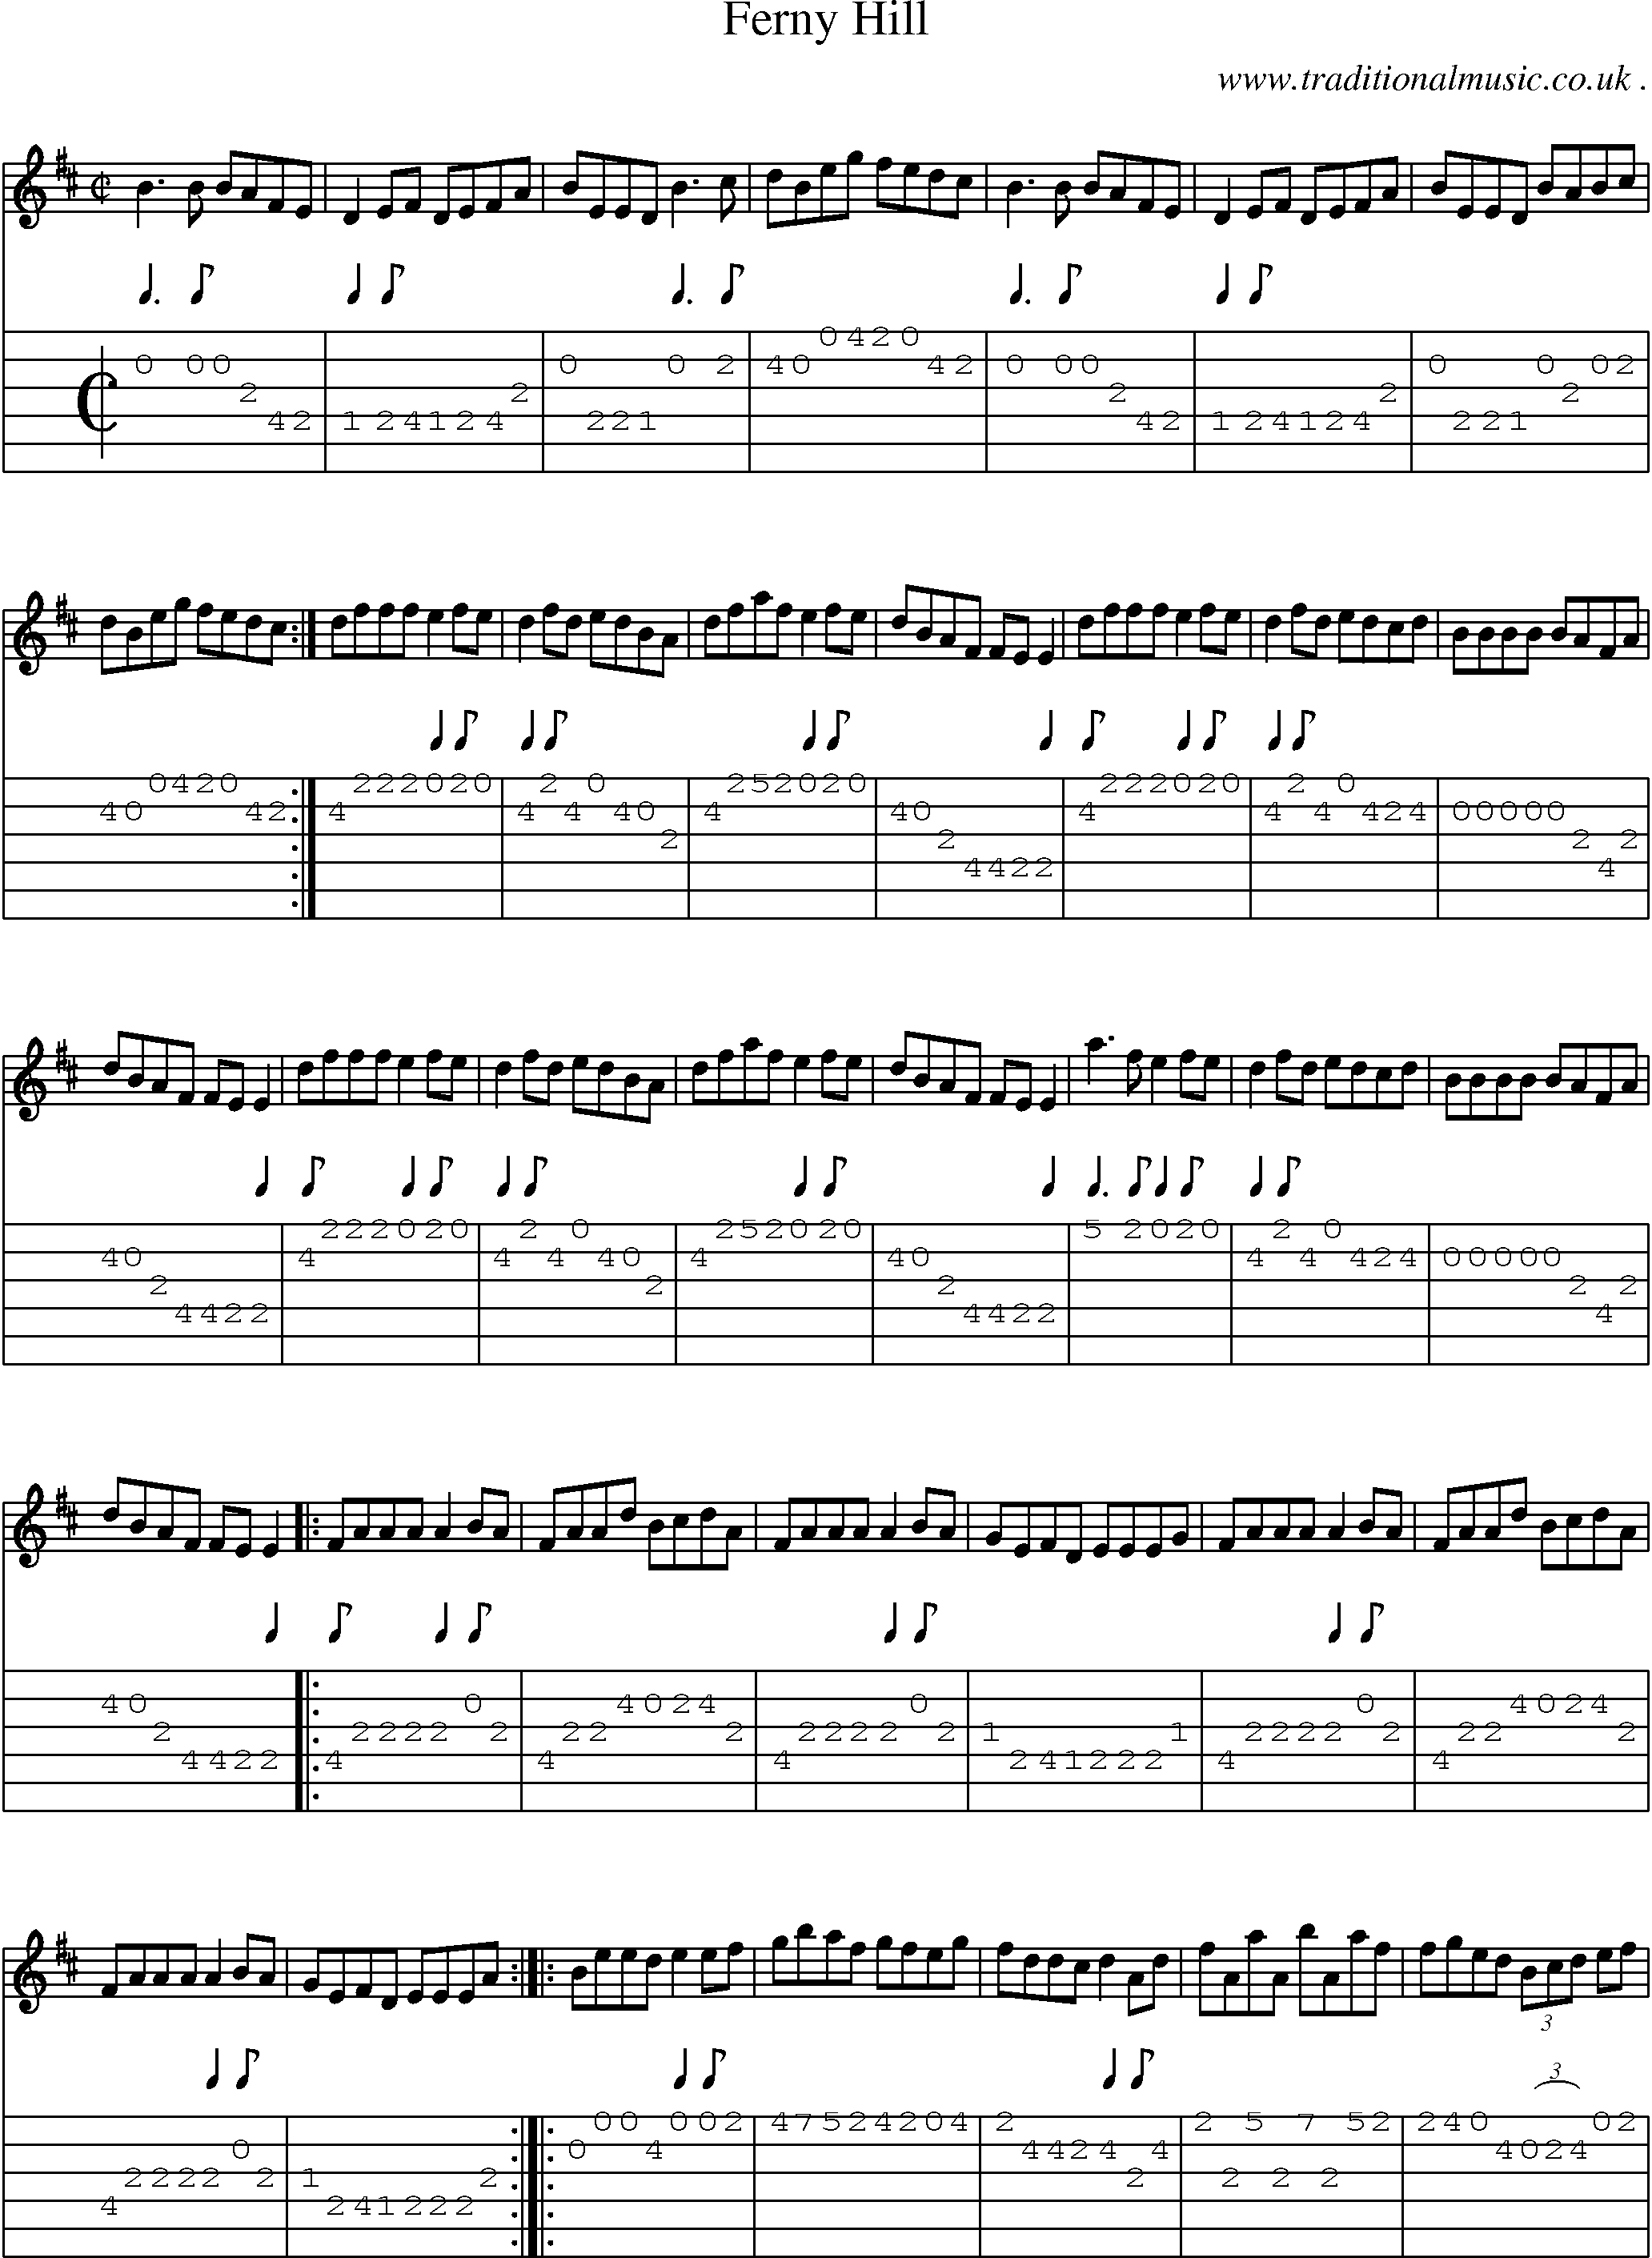 Sheet-Music and Guitar Tabs for Ferny Hill